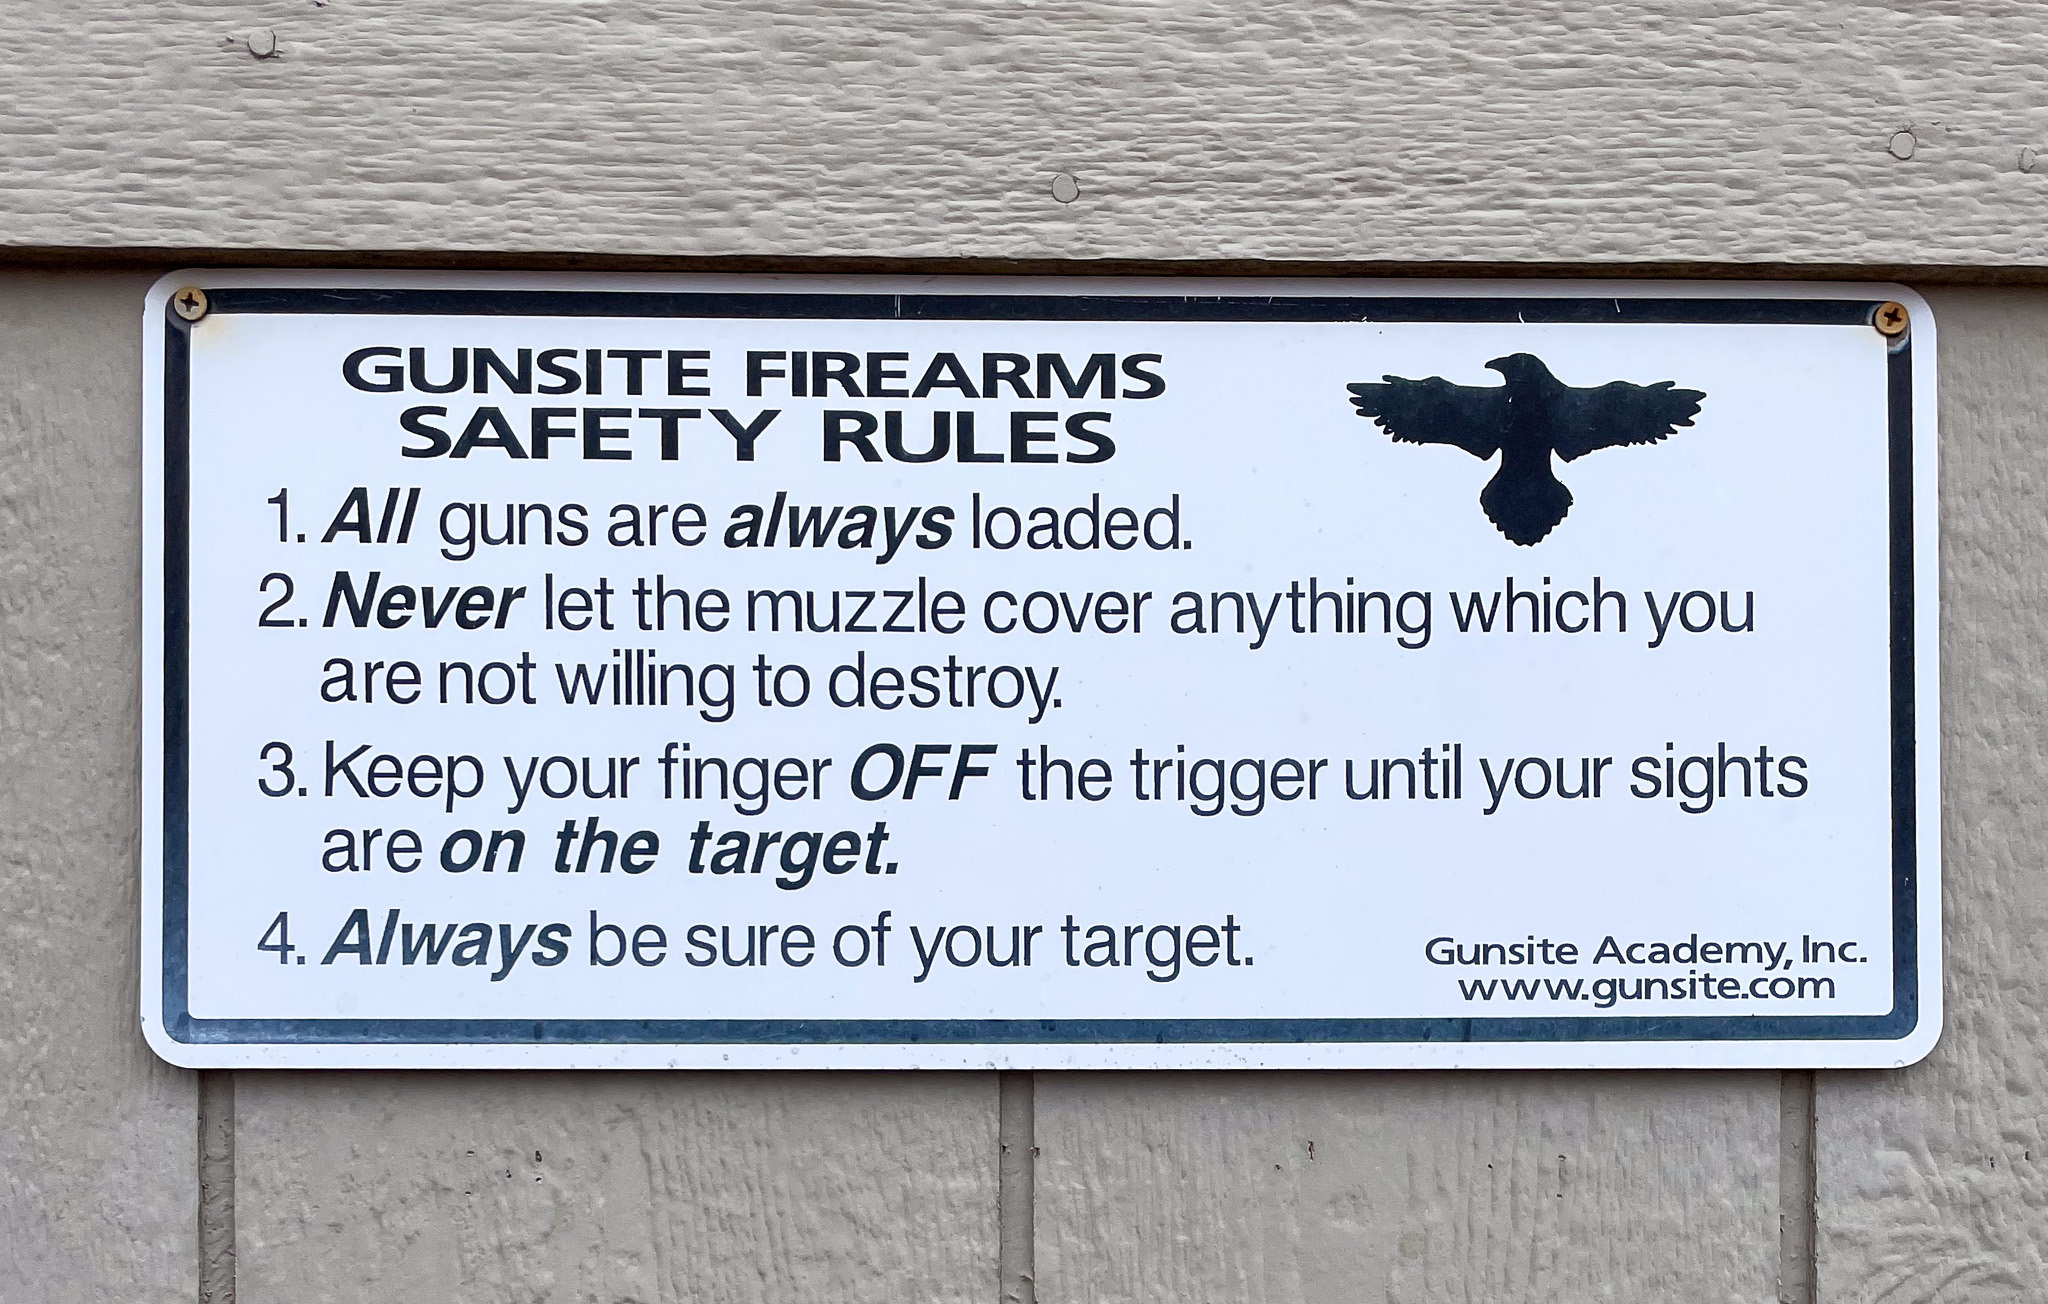 Gunsite Academy's firearms safety rules